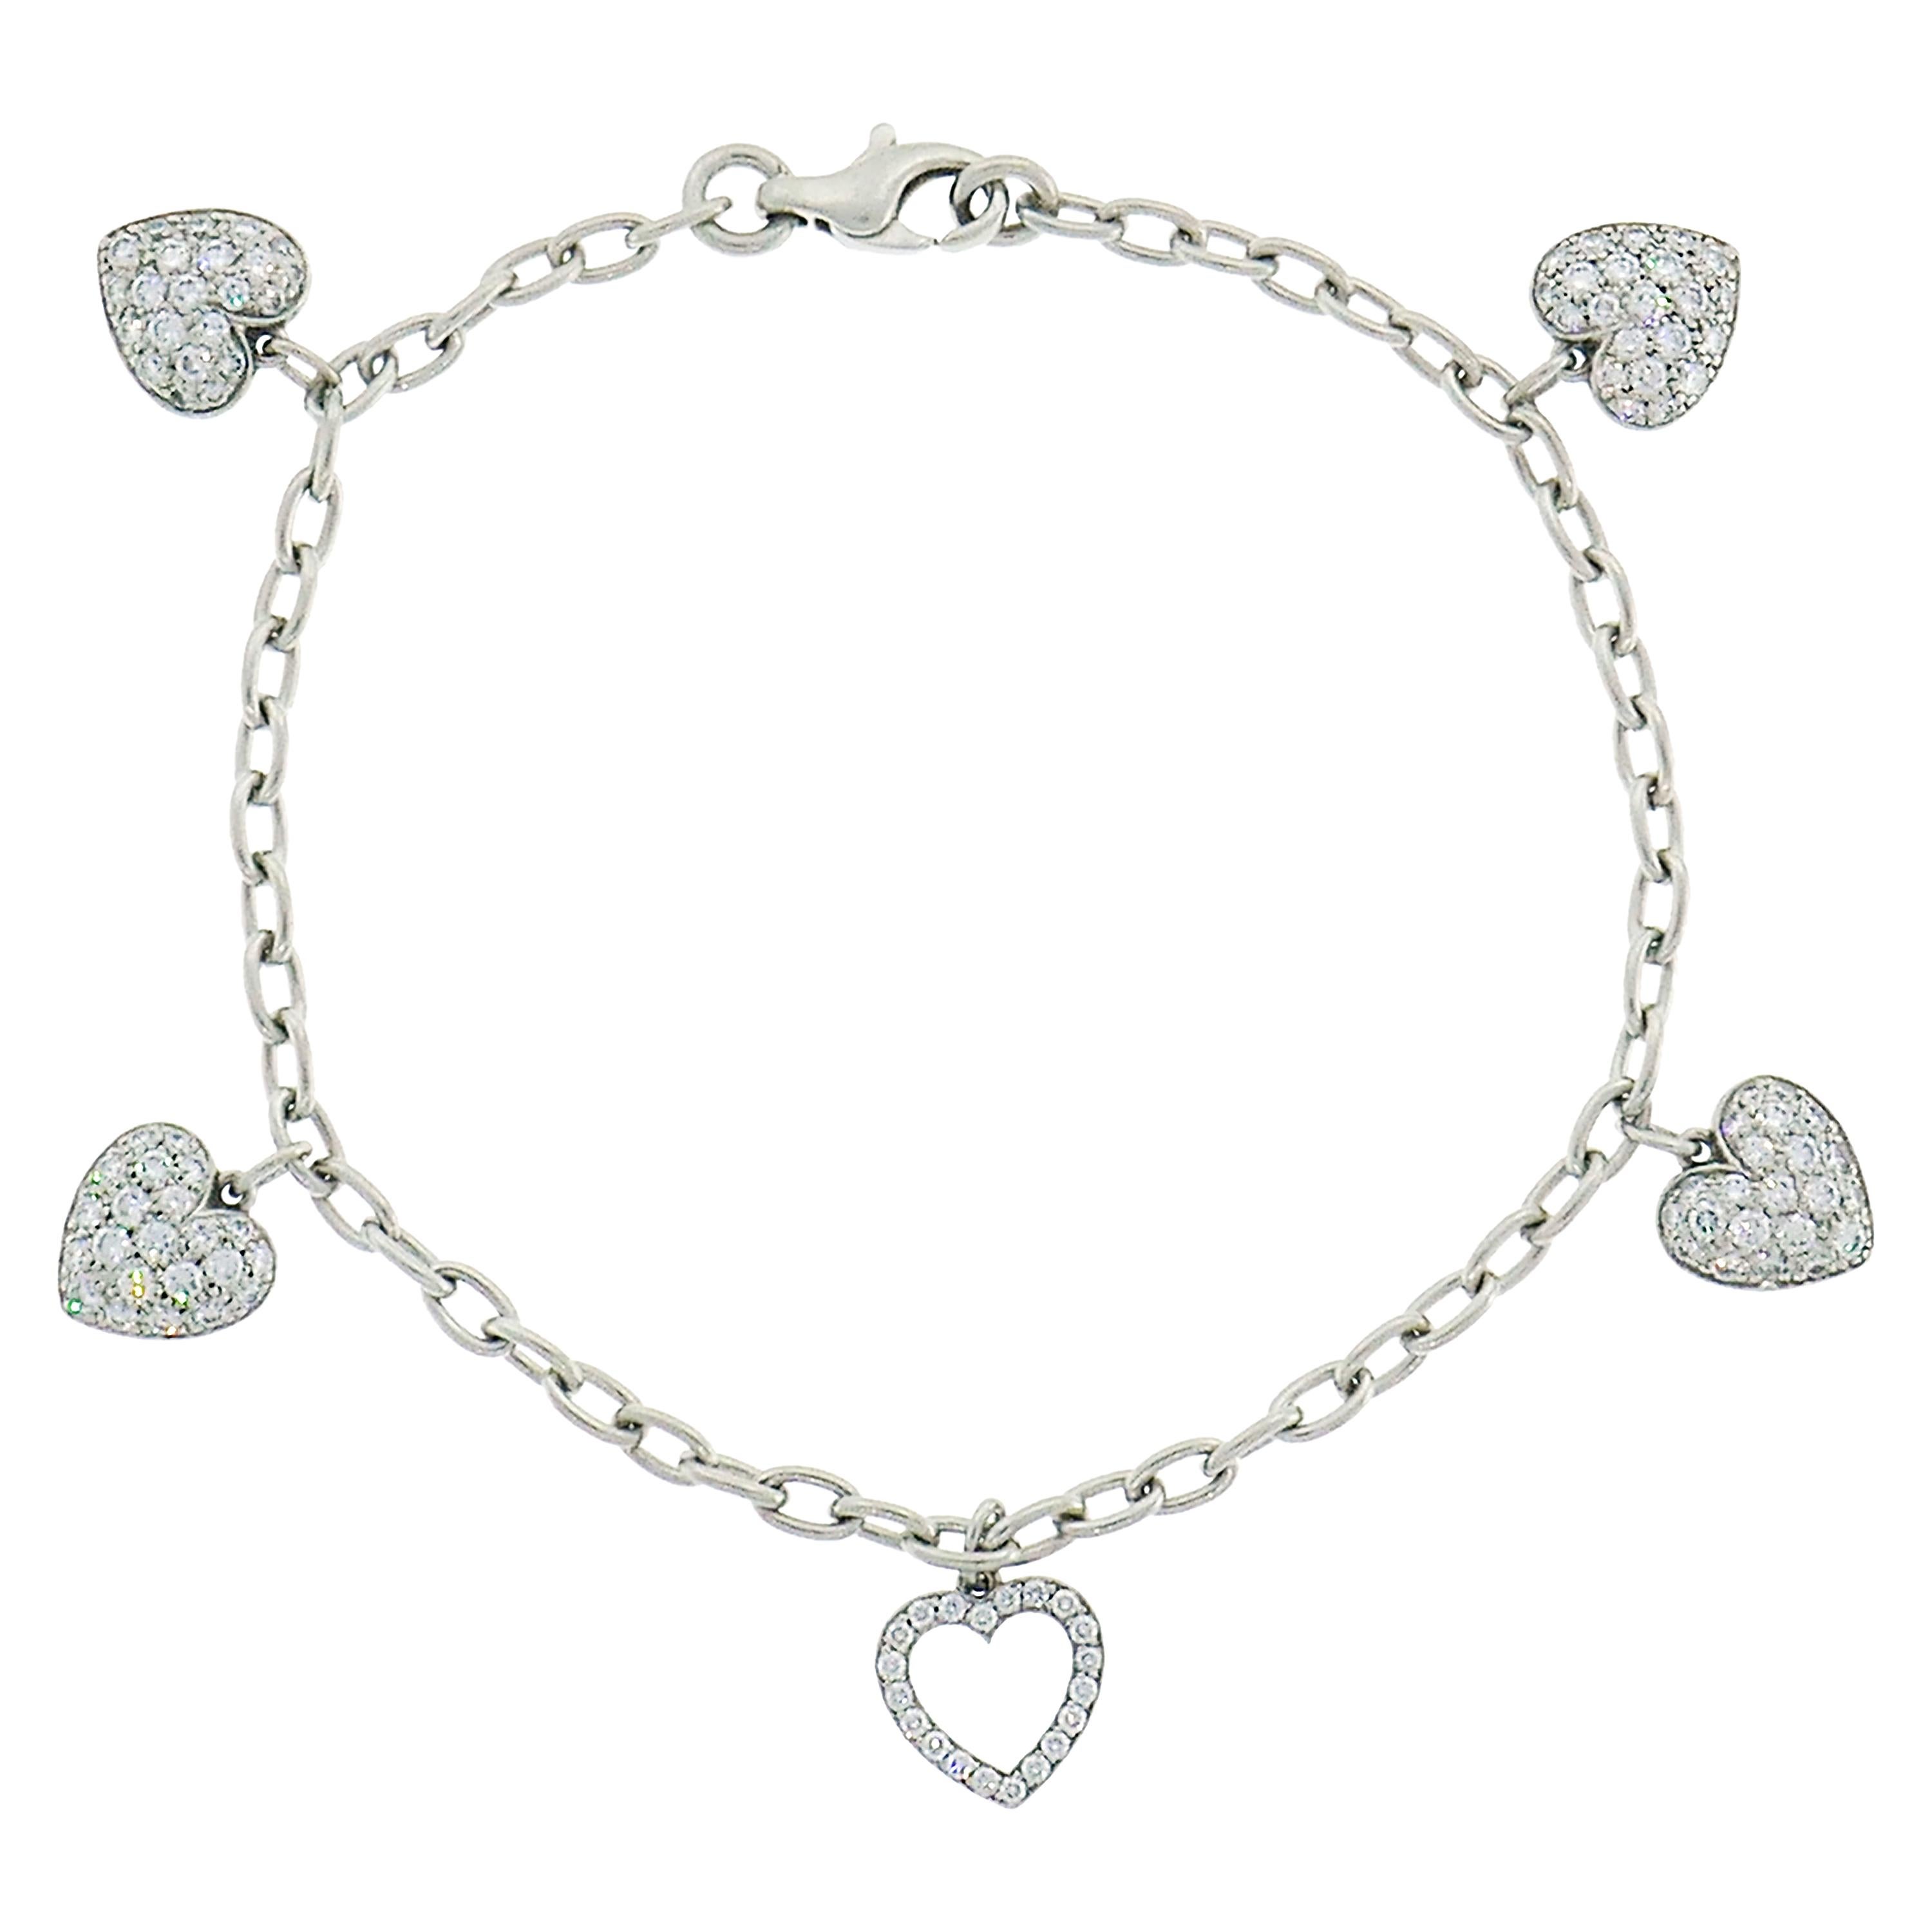 Tiffany and Co. Diamond Platinum Charm Bracelet with Heart Charms at ...